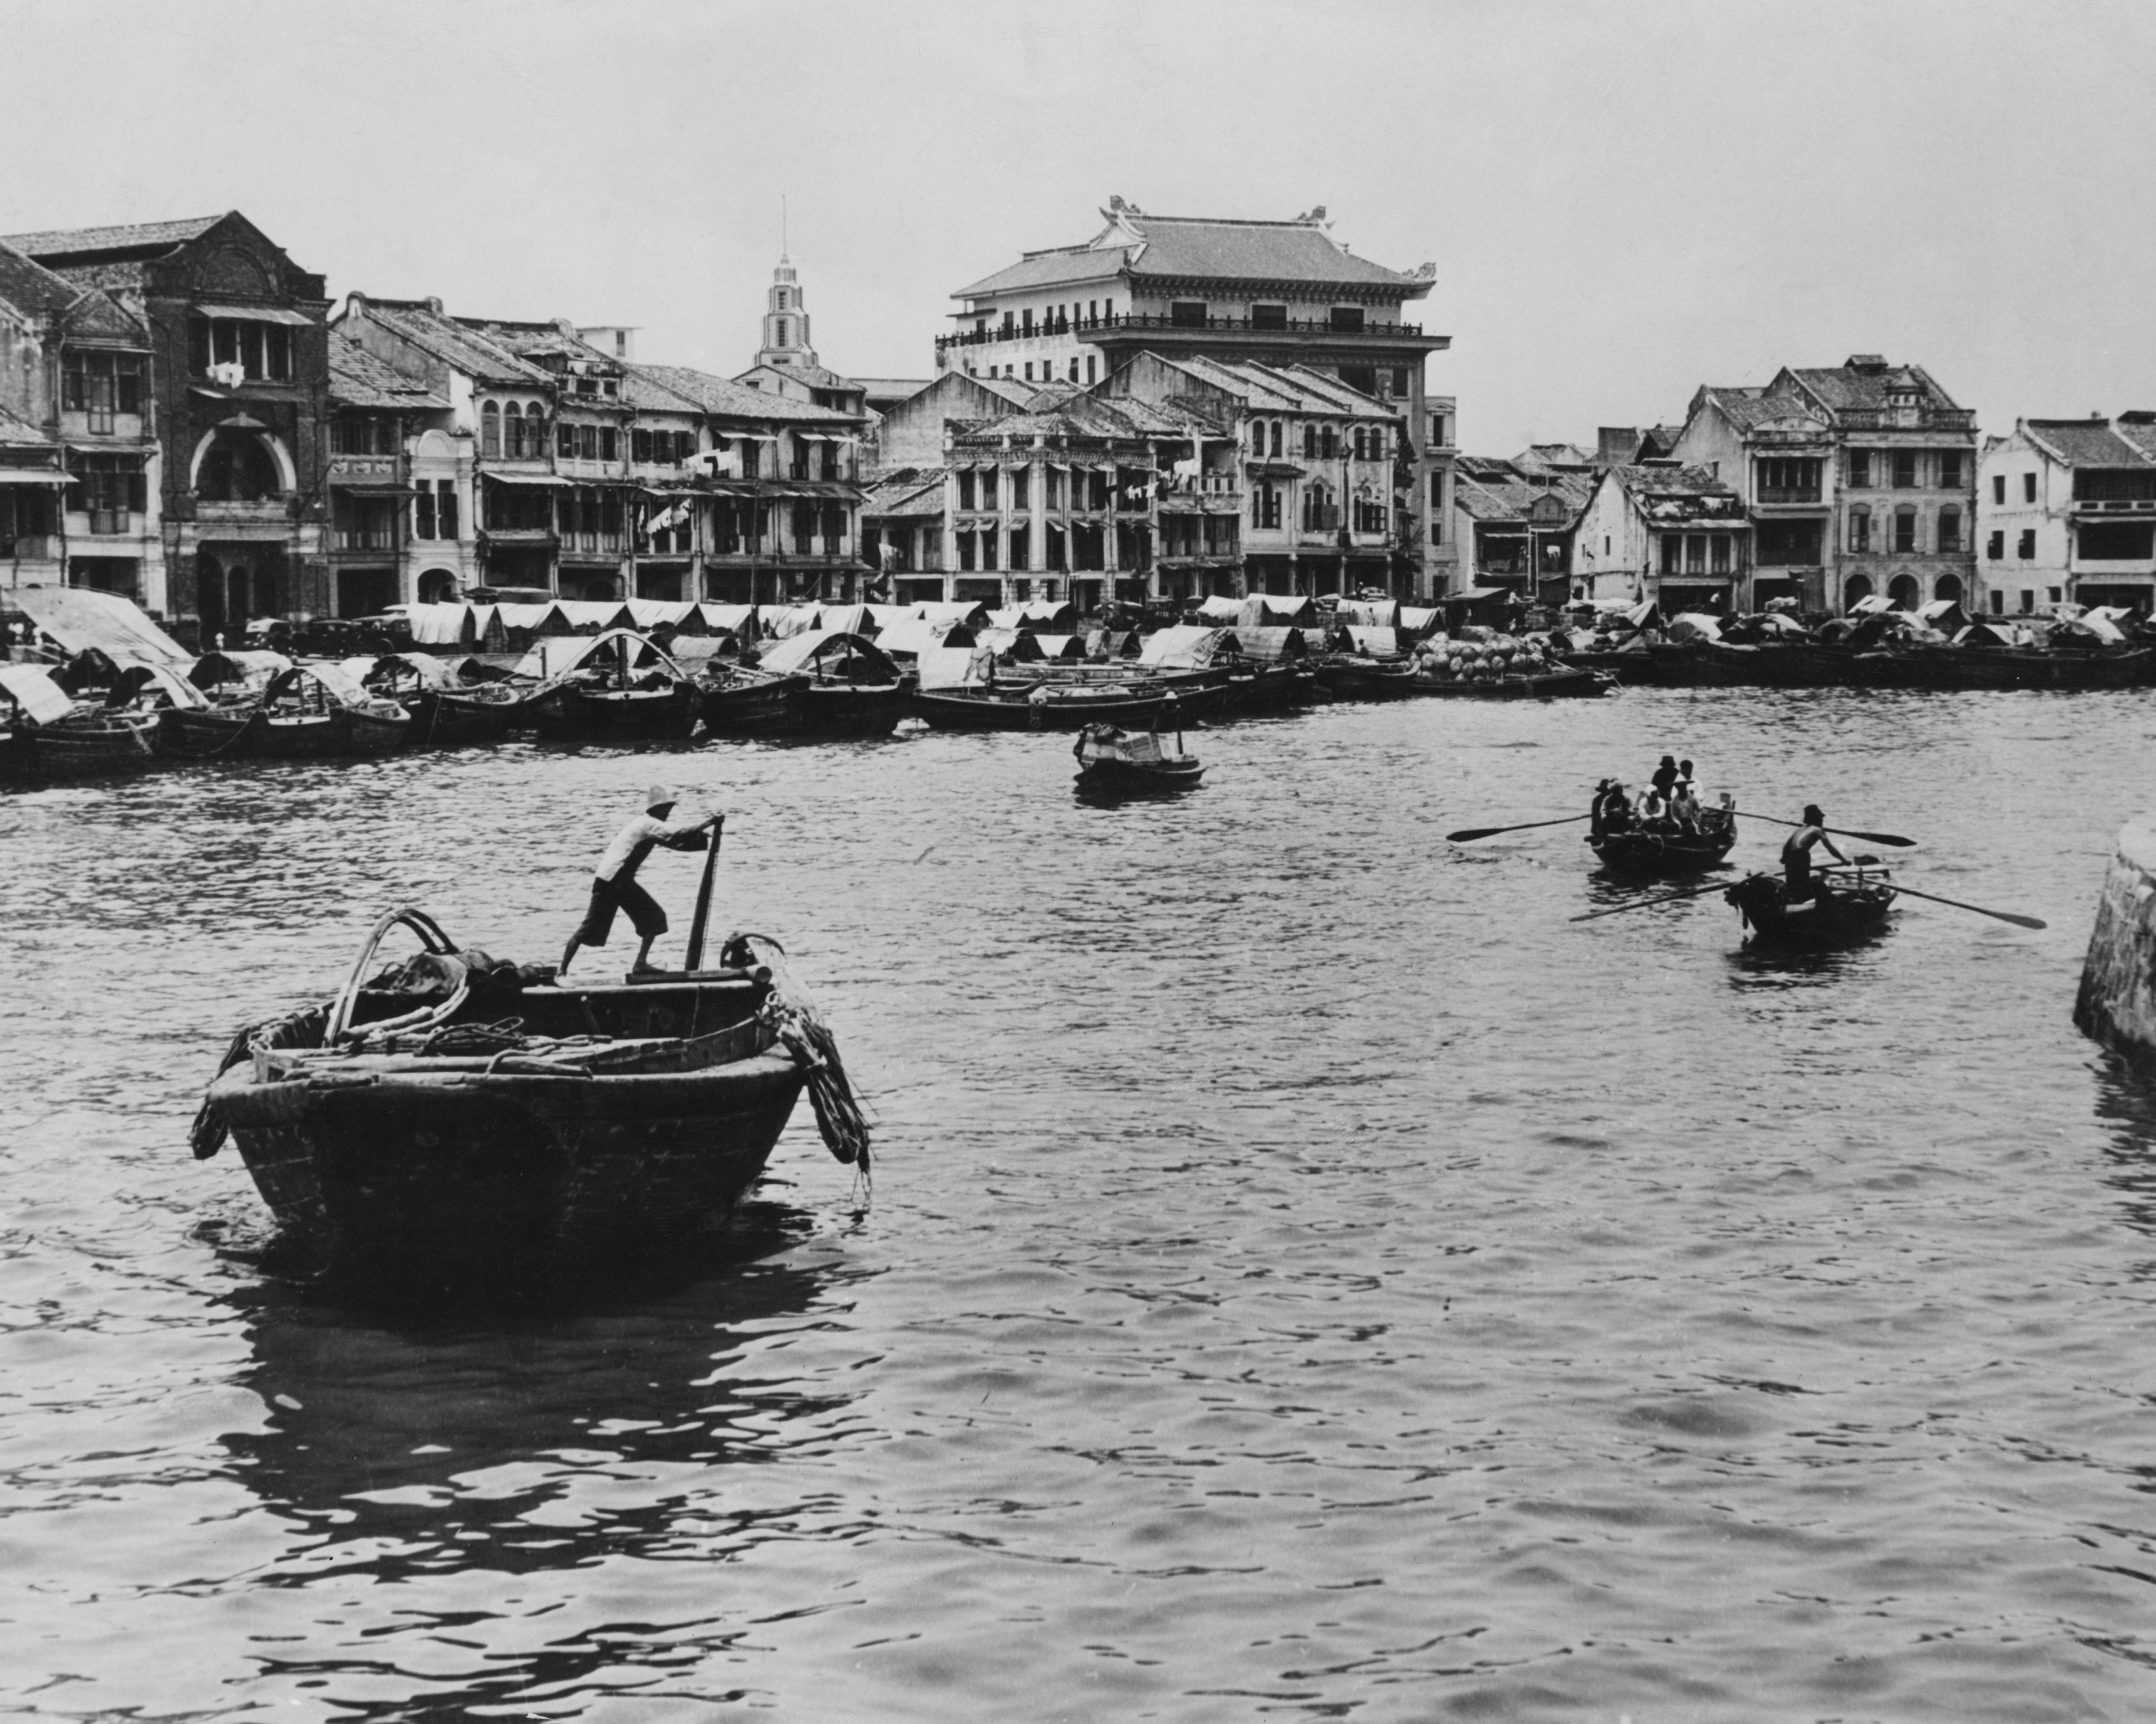 Sampans in Singapore harbour, circa 1955. Today air travel is the most popular way to get between China, including Hong Kong, and Southeast Asia, but decades ago coastal shipping connected ports in the region. Photo: Getty Images